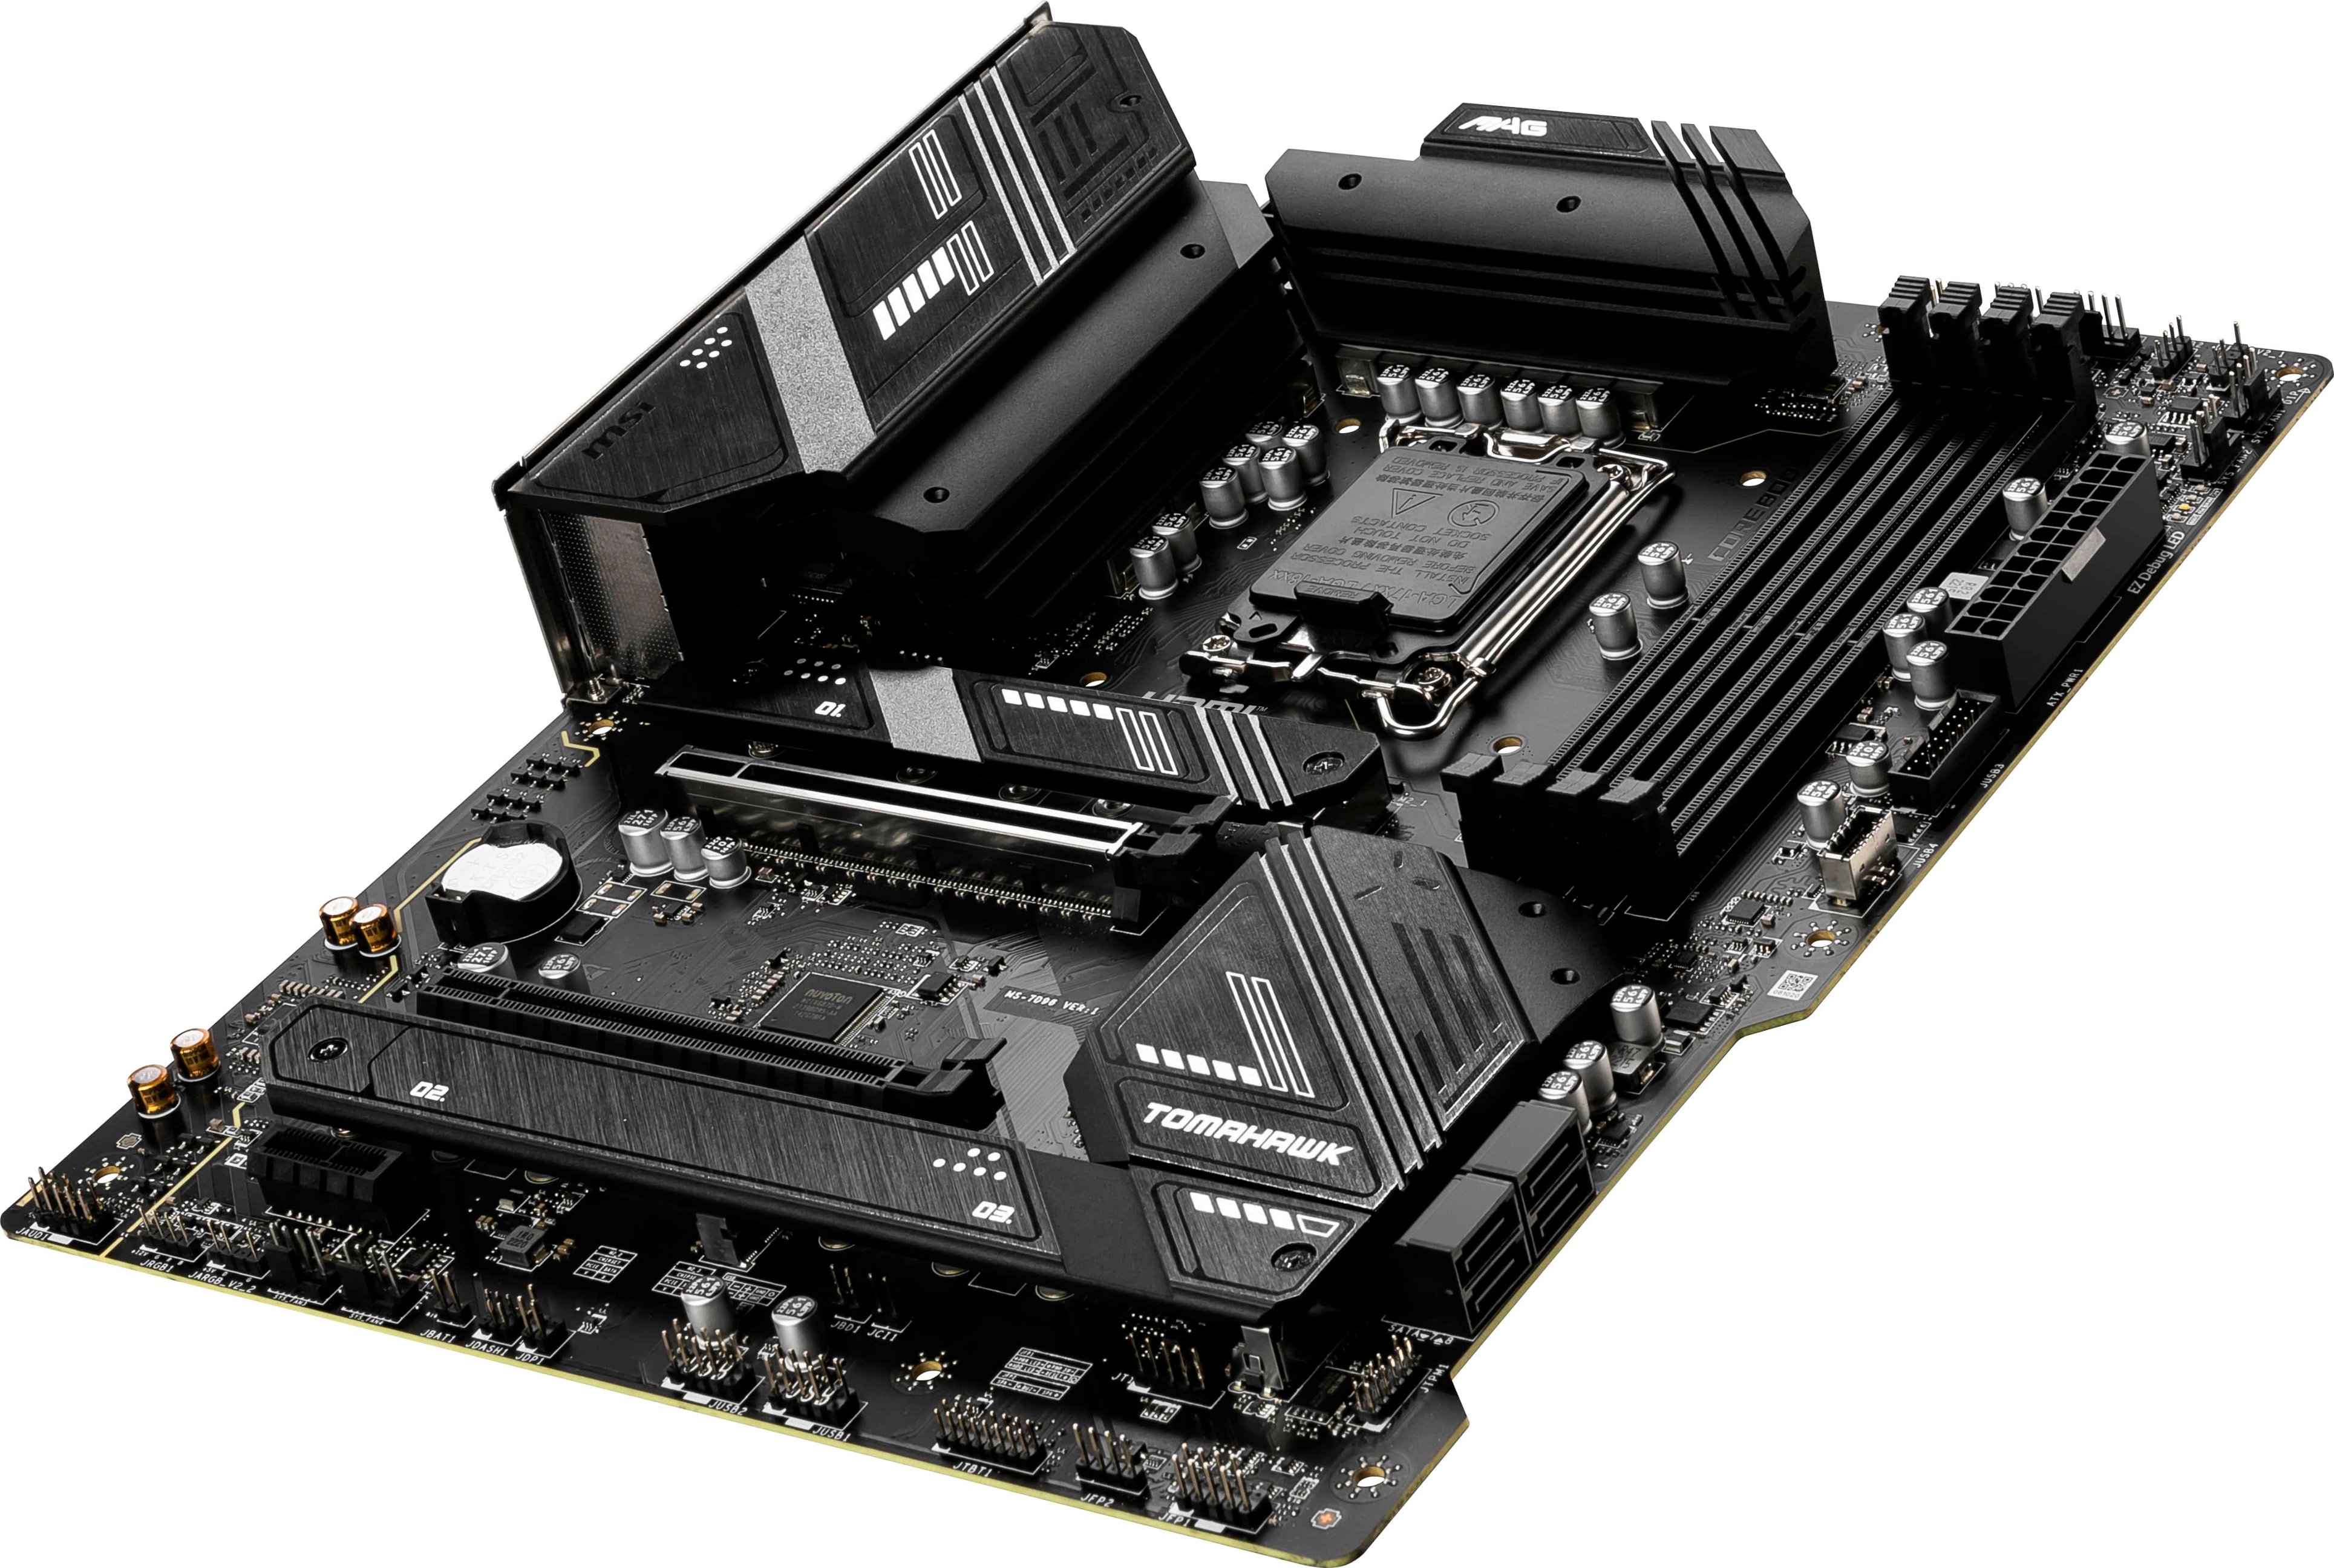 Budget Intel B760 motherboards from Gigabyte and MSI have been pictured 